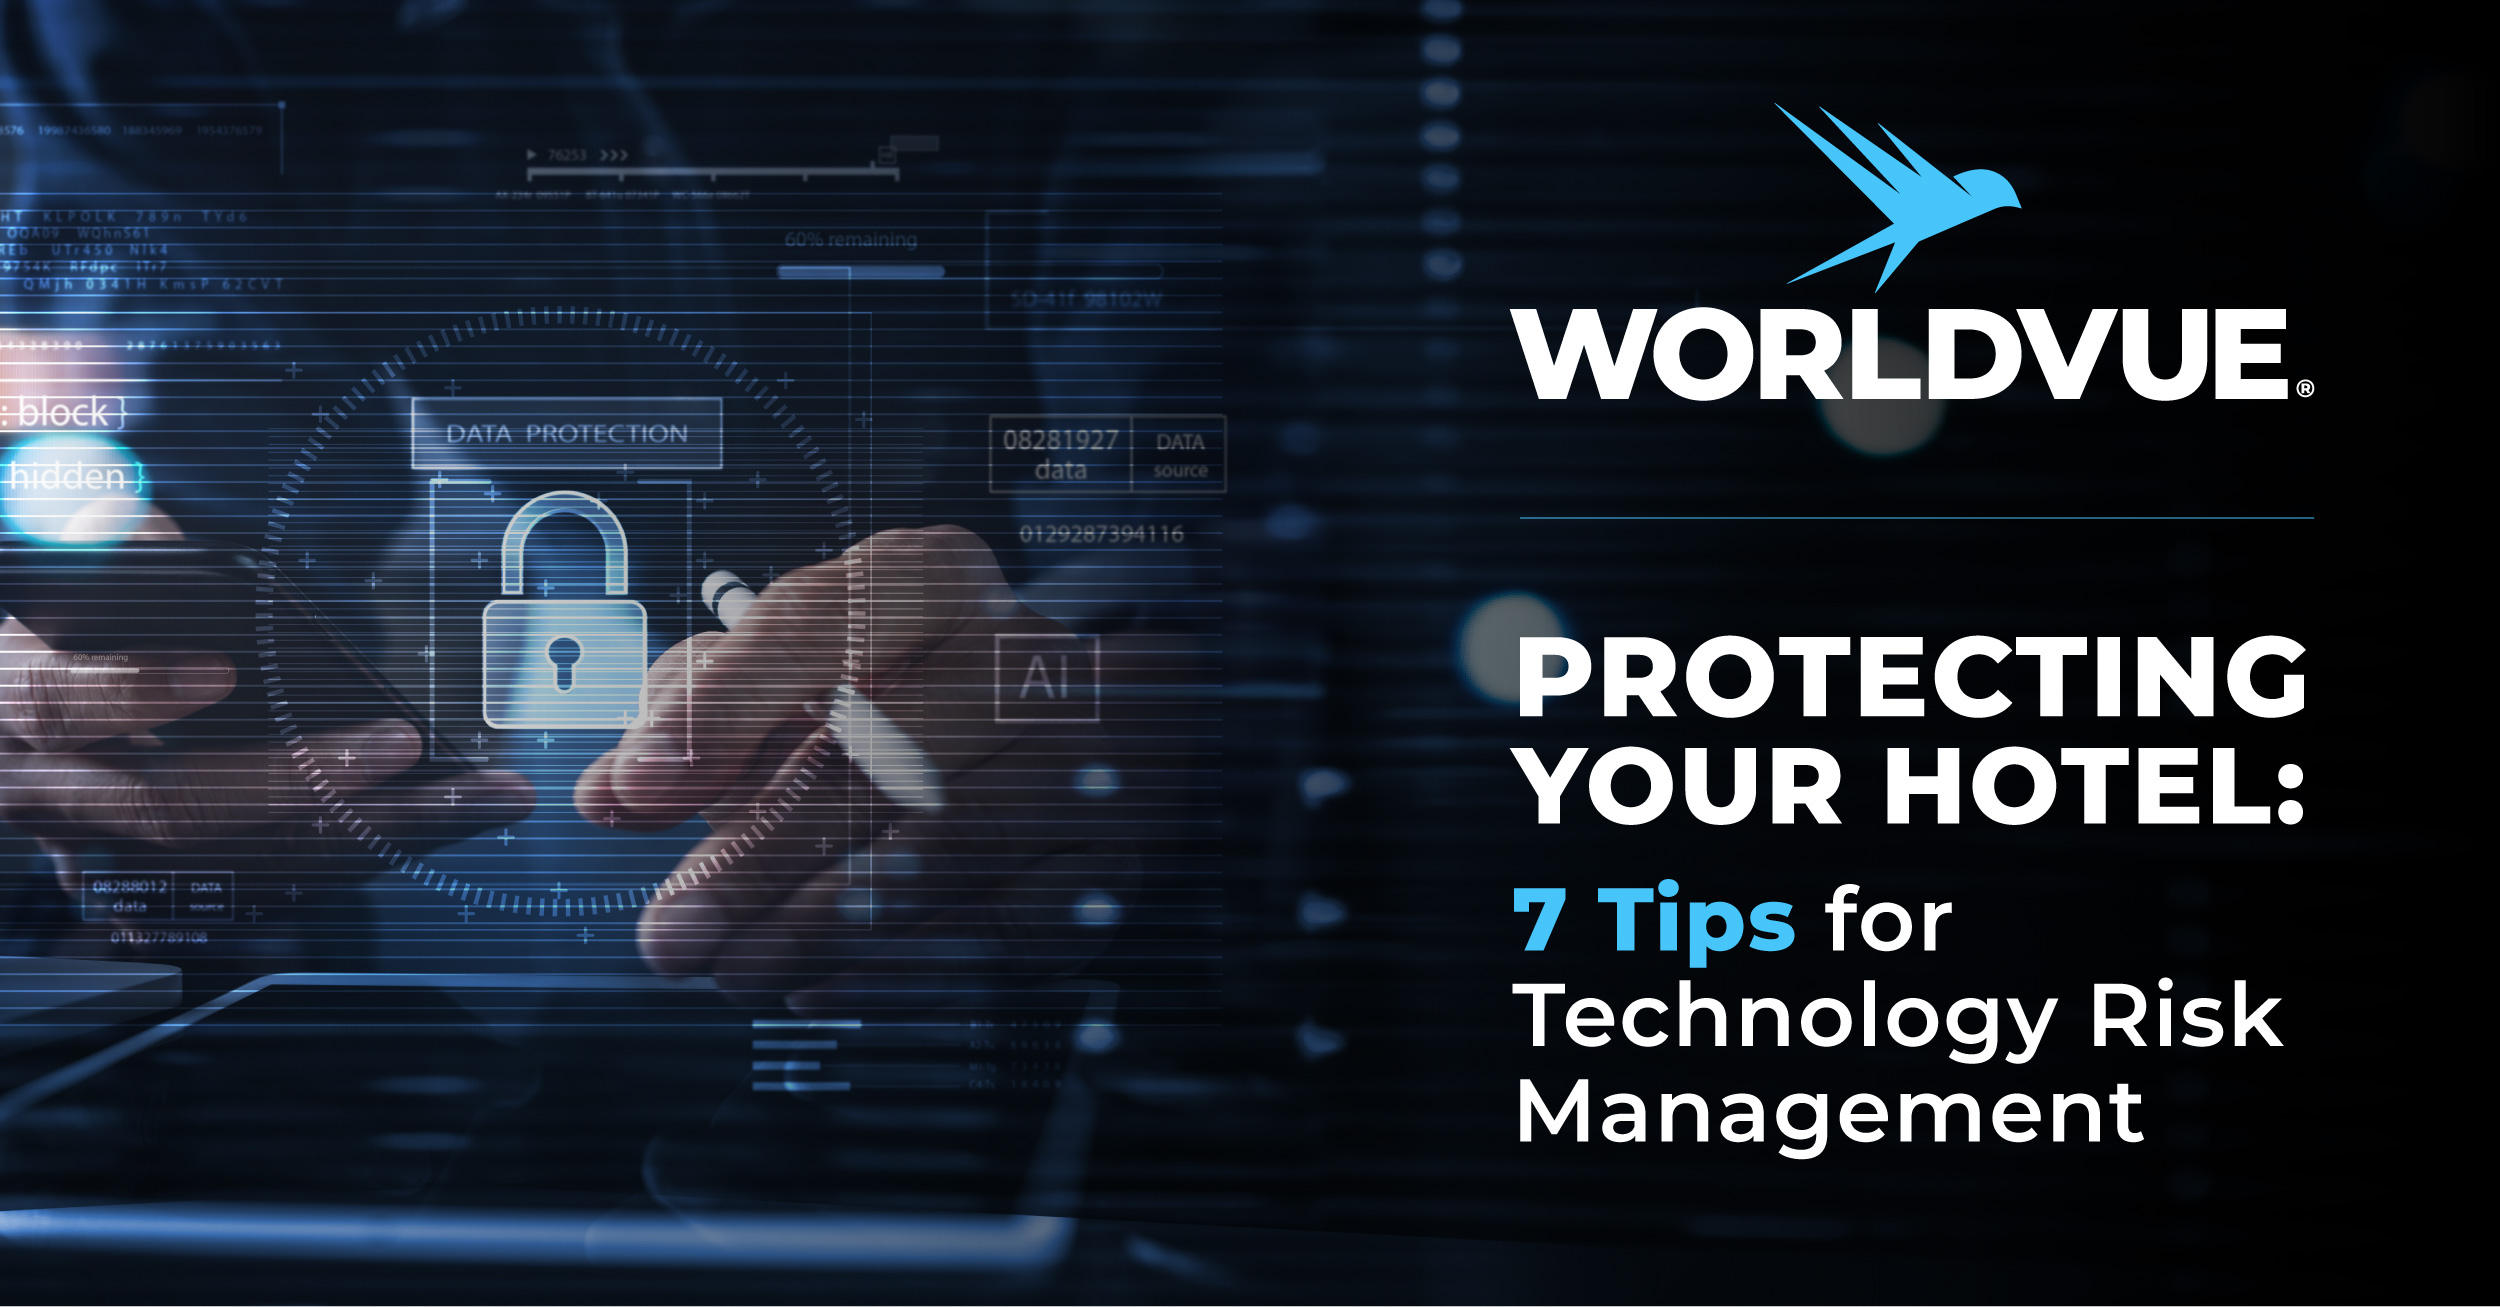 person using phone and tablet, overlaid with image of lock, plus WorldVue logo and text saying "Protecting Your Hotel: 7 Tips for Technology Risk Management"